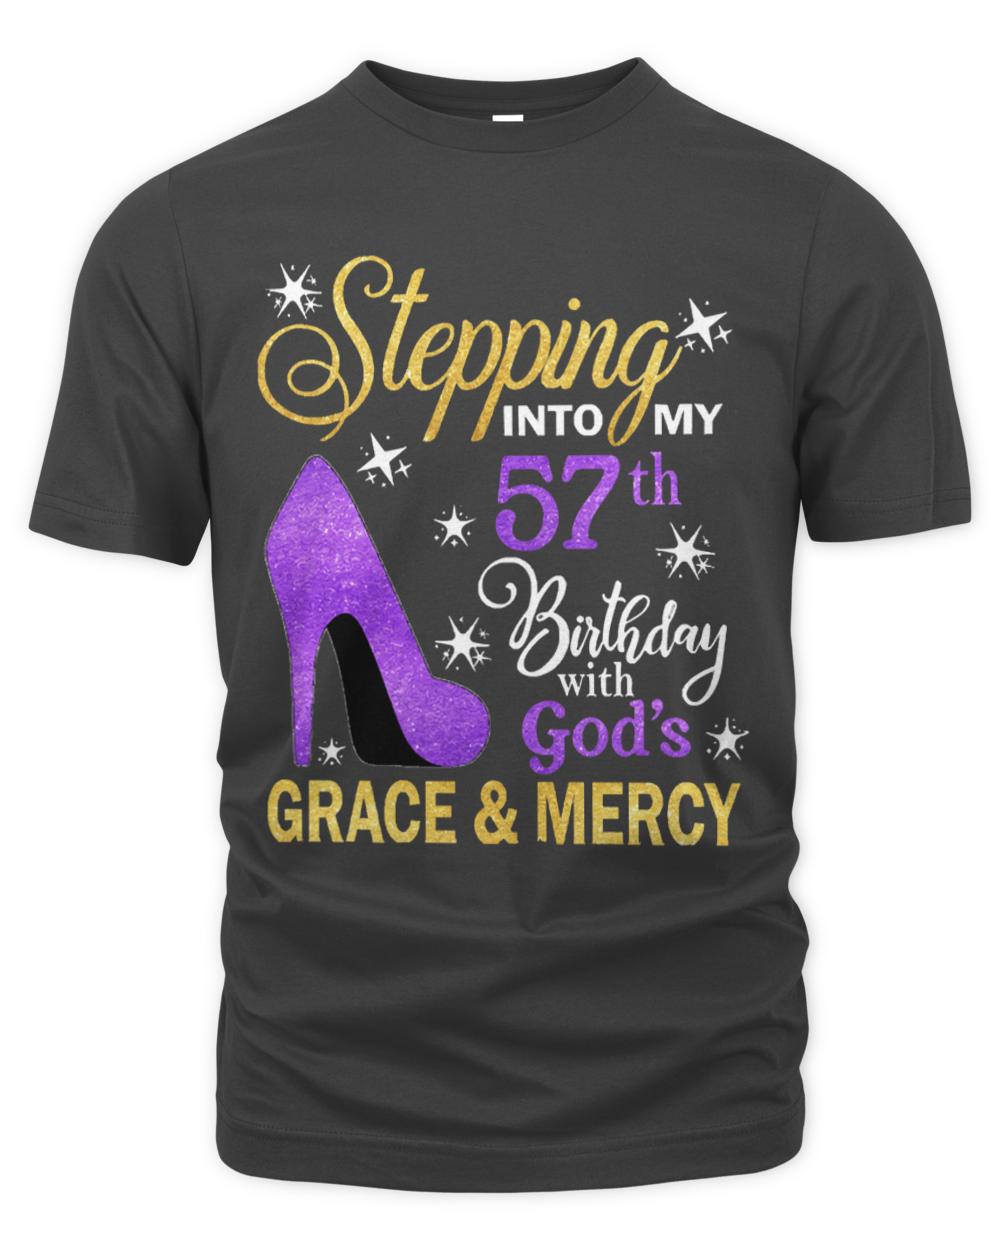 57th Birthday T-ShirtStepping Into My 57th Birthday With God's Grace & Mercy Bday T-Shirt (17)